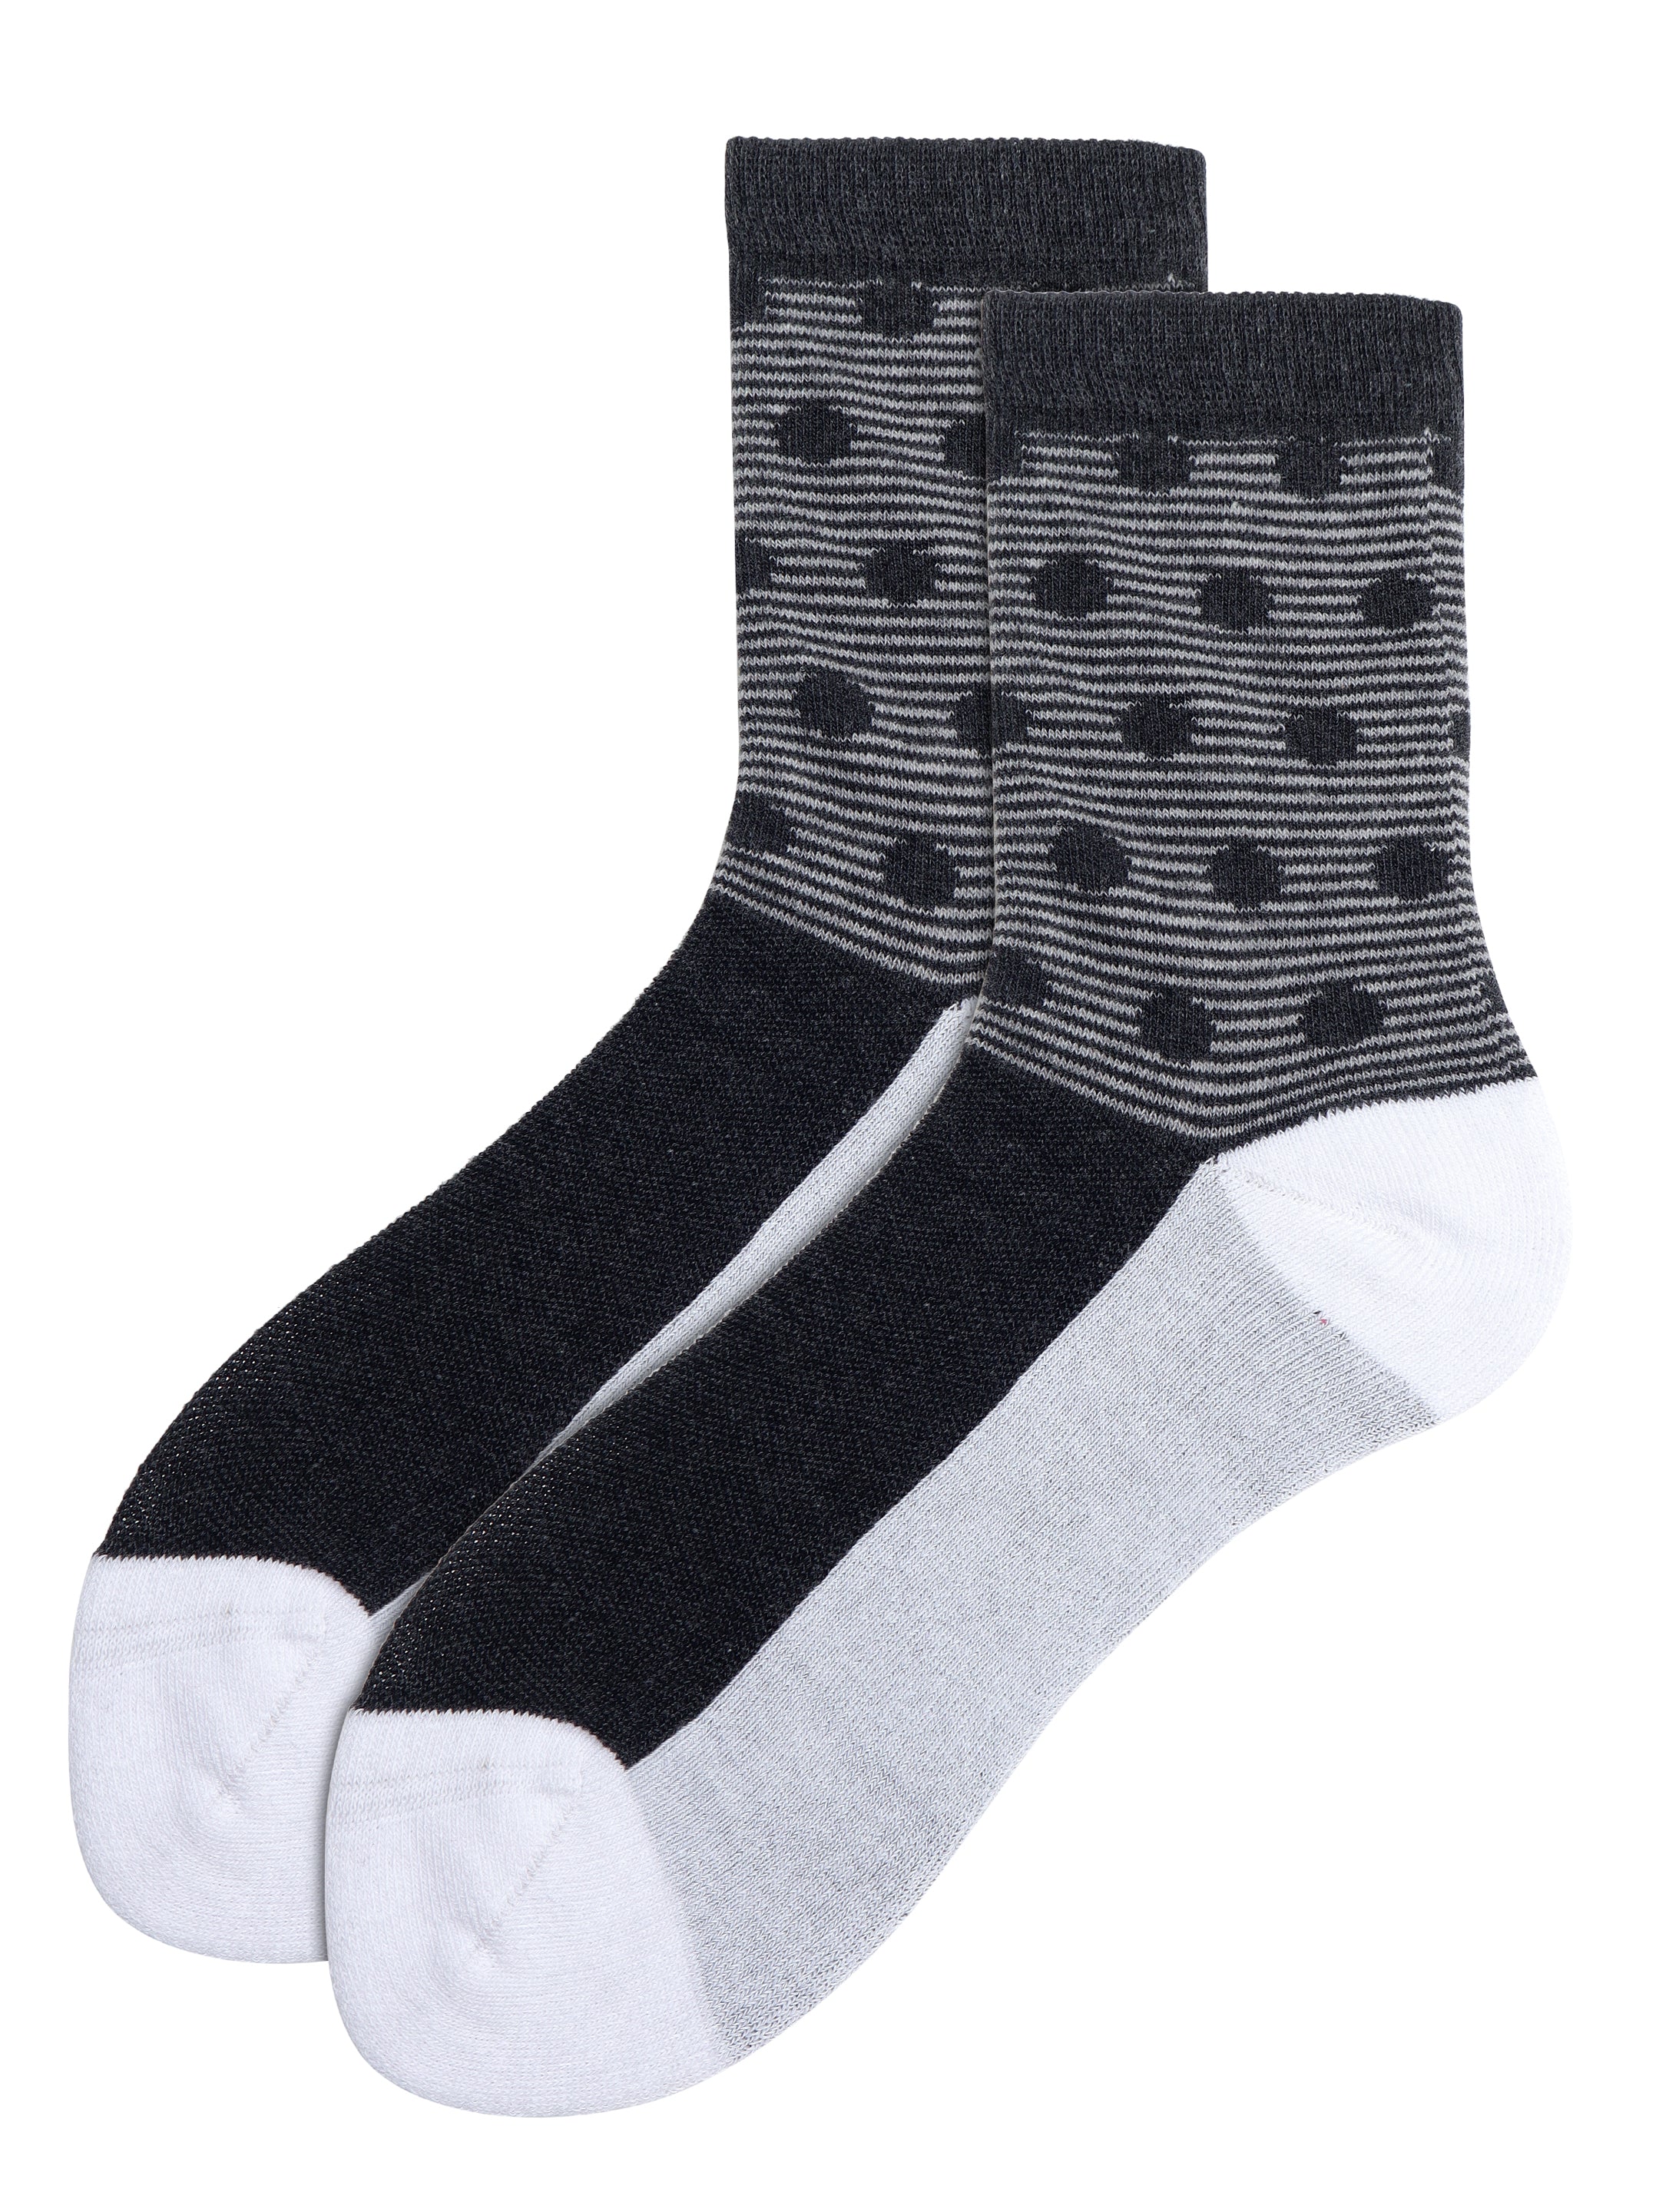 Diabetic Care | The Ultimate Box Of 8 Pairs | Travel Socks